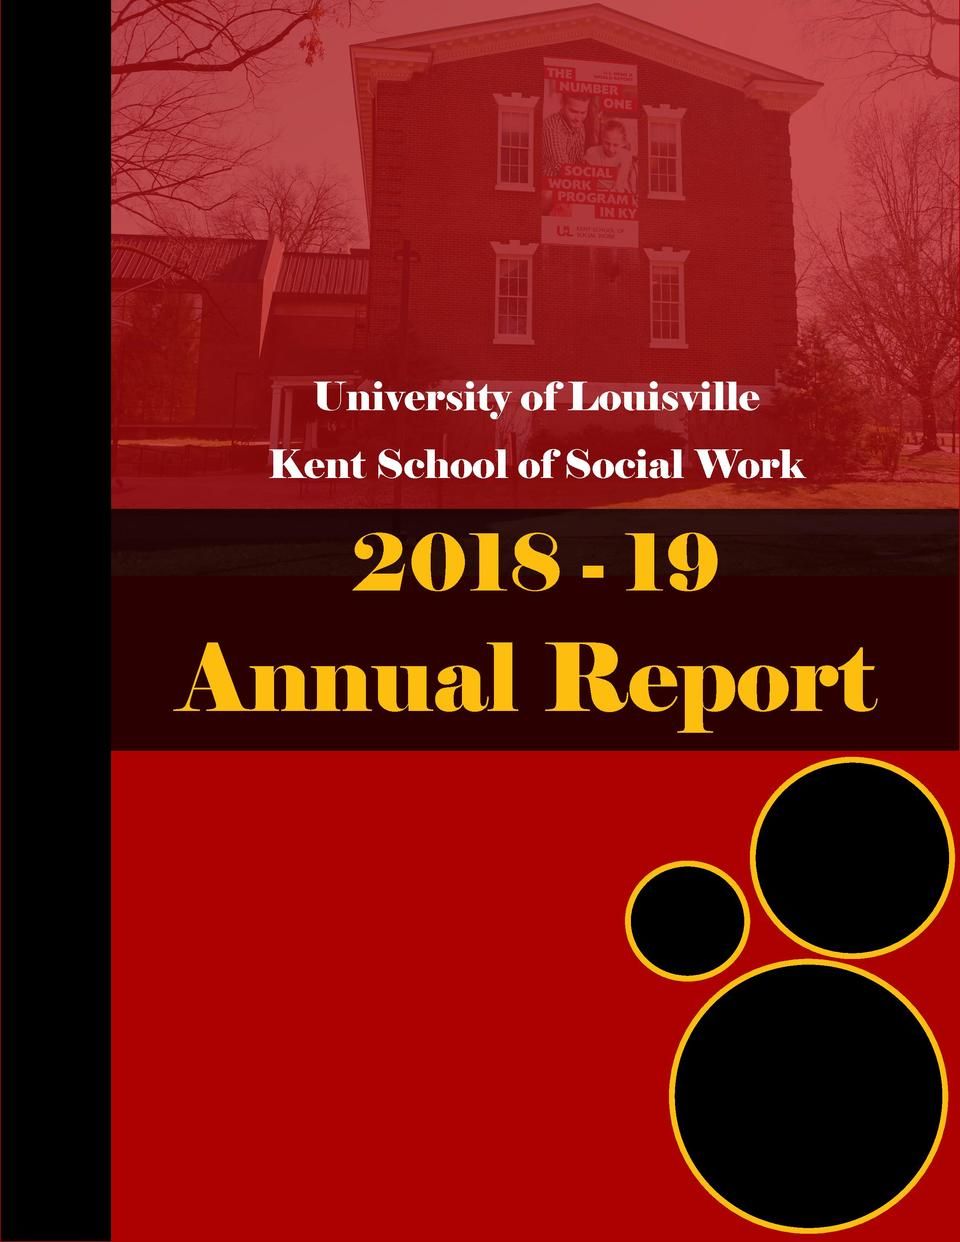 Download 2018-19 Annual Report